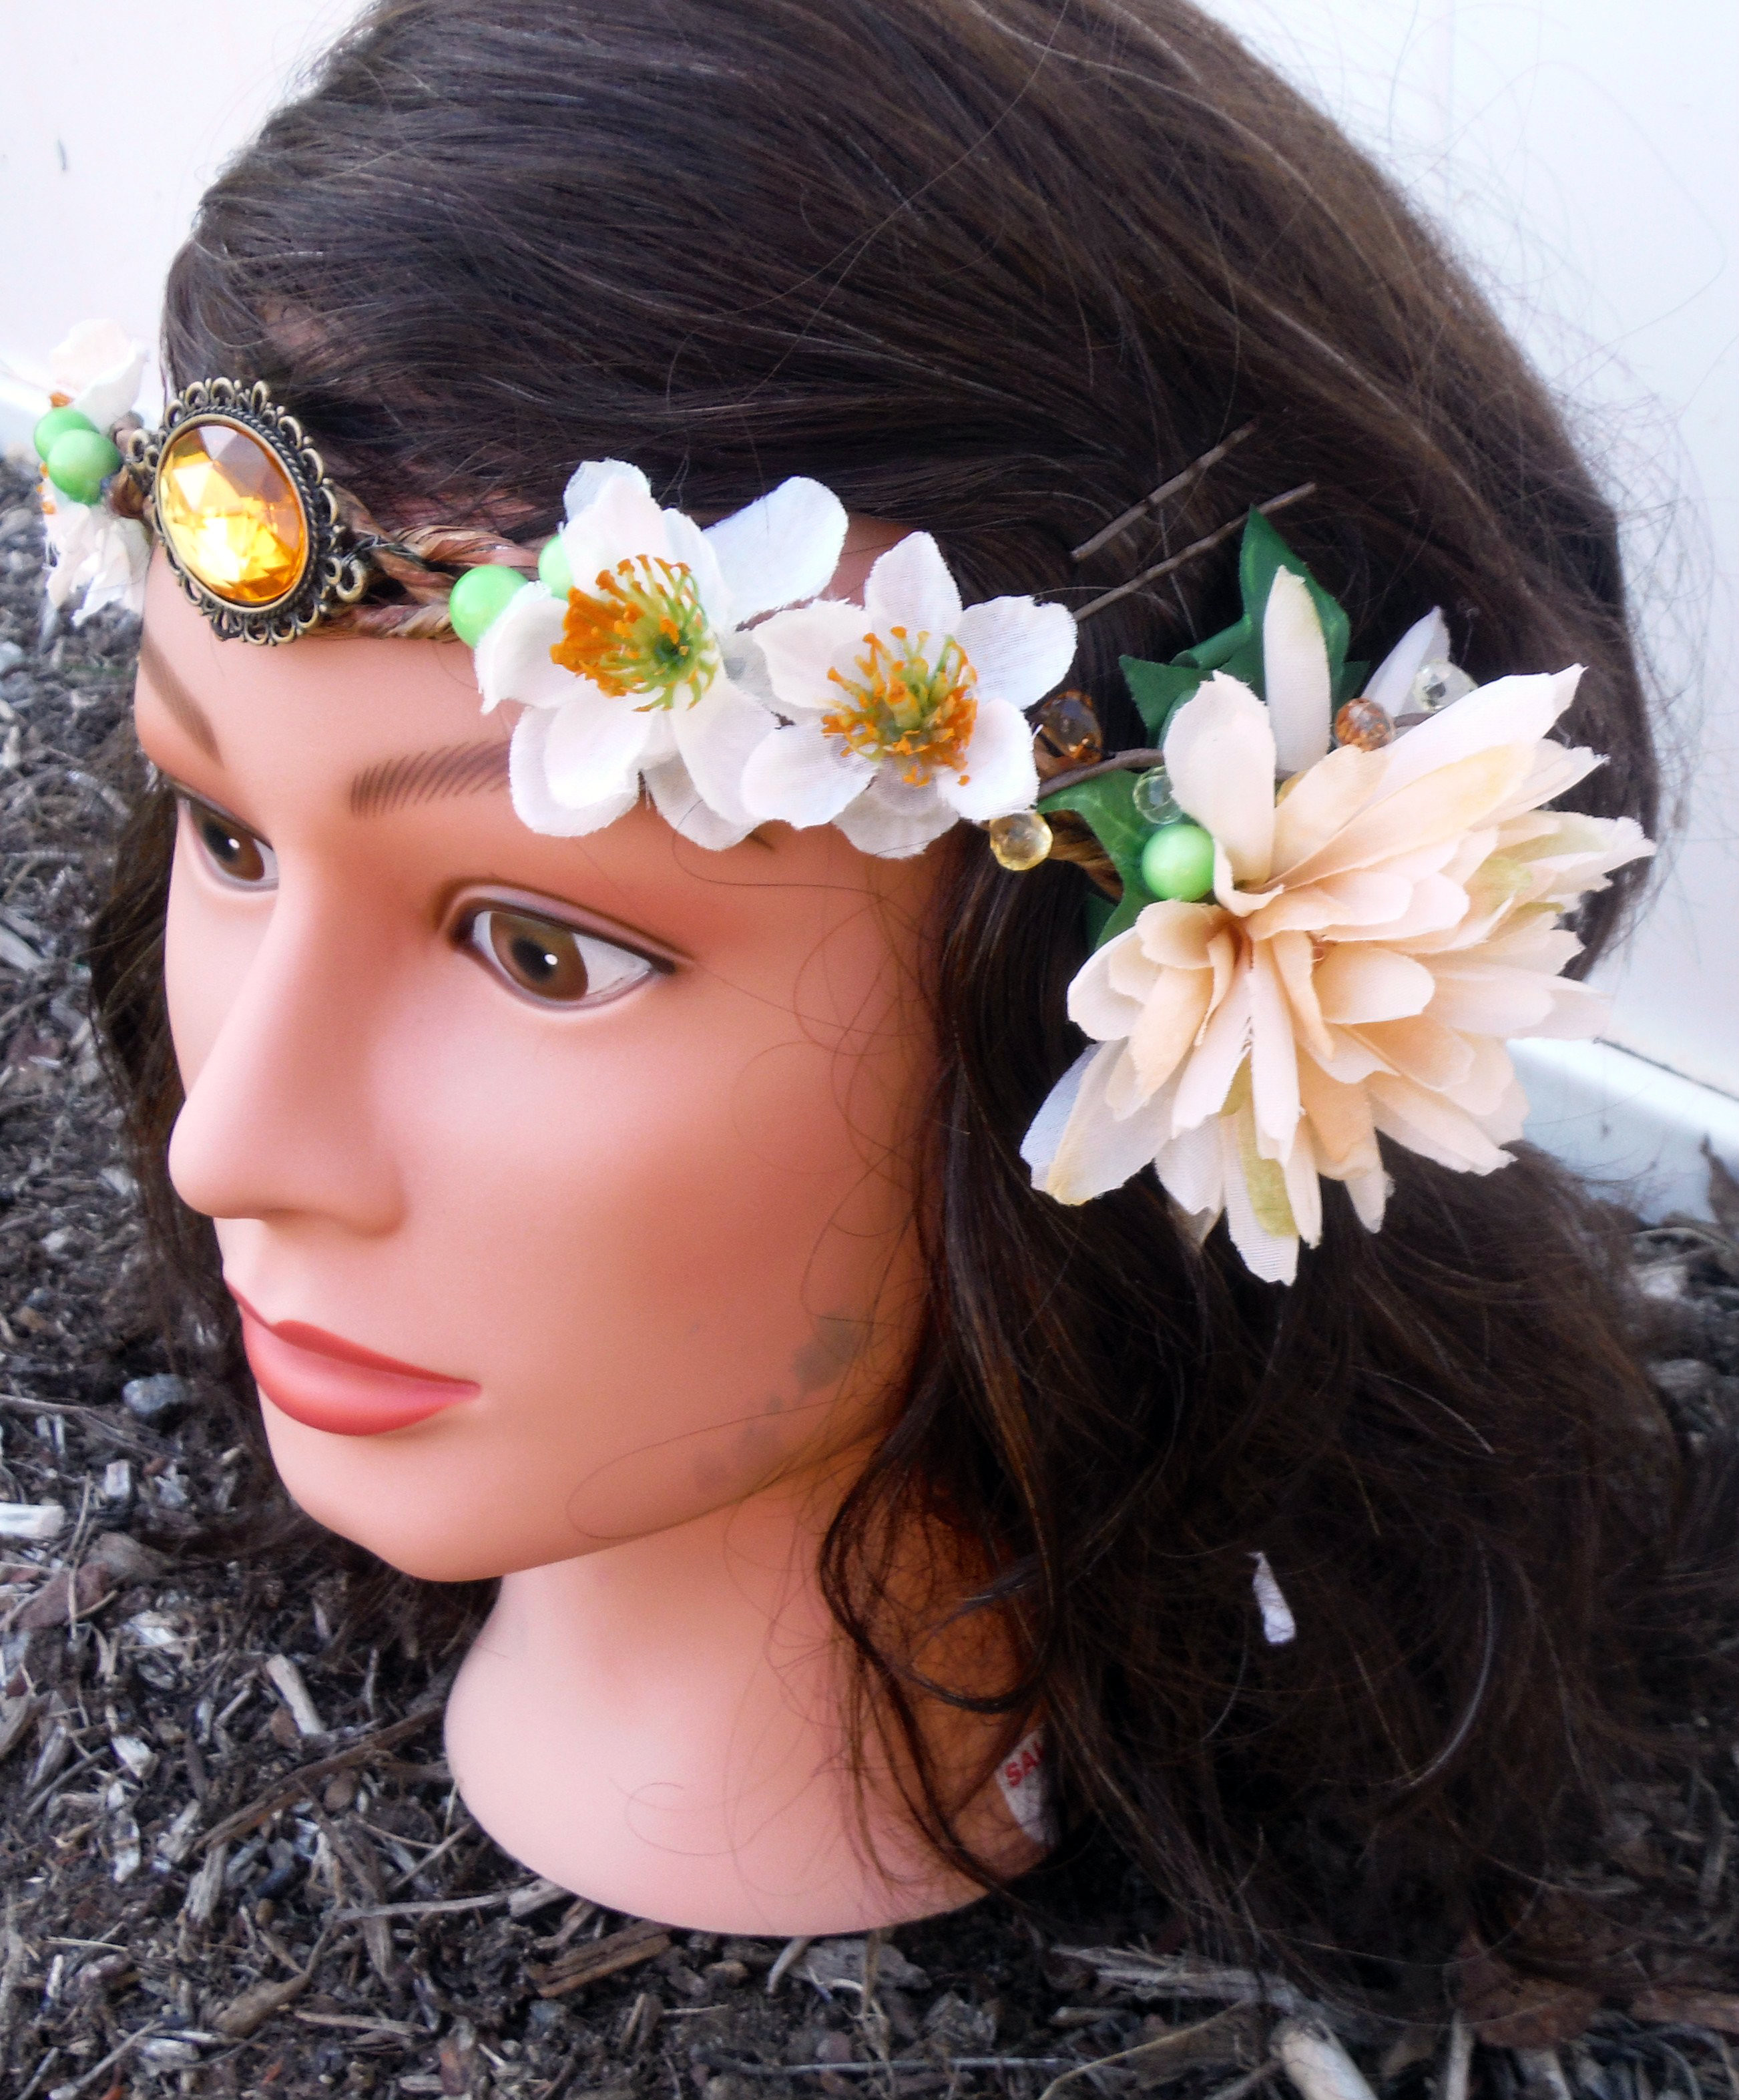 Halloween Costumes With Flower Crowns
 Woodland Forest Fairy Flower Crown Halloween Costume